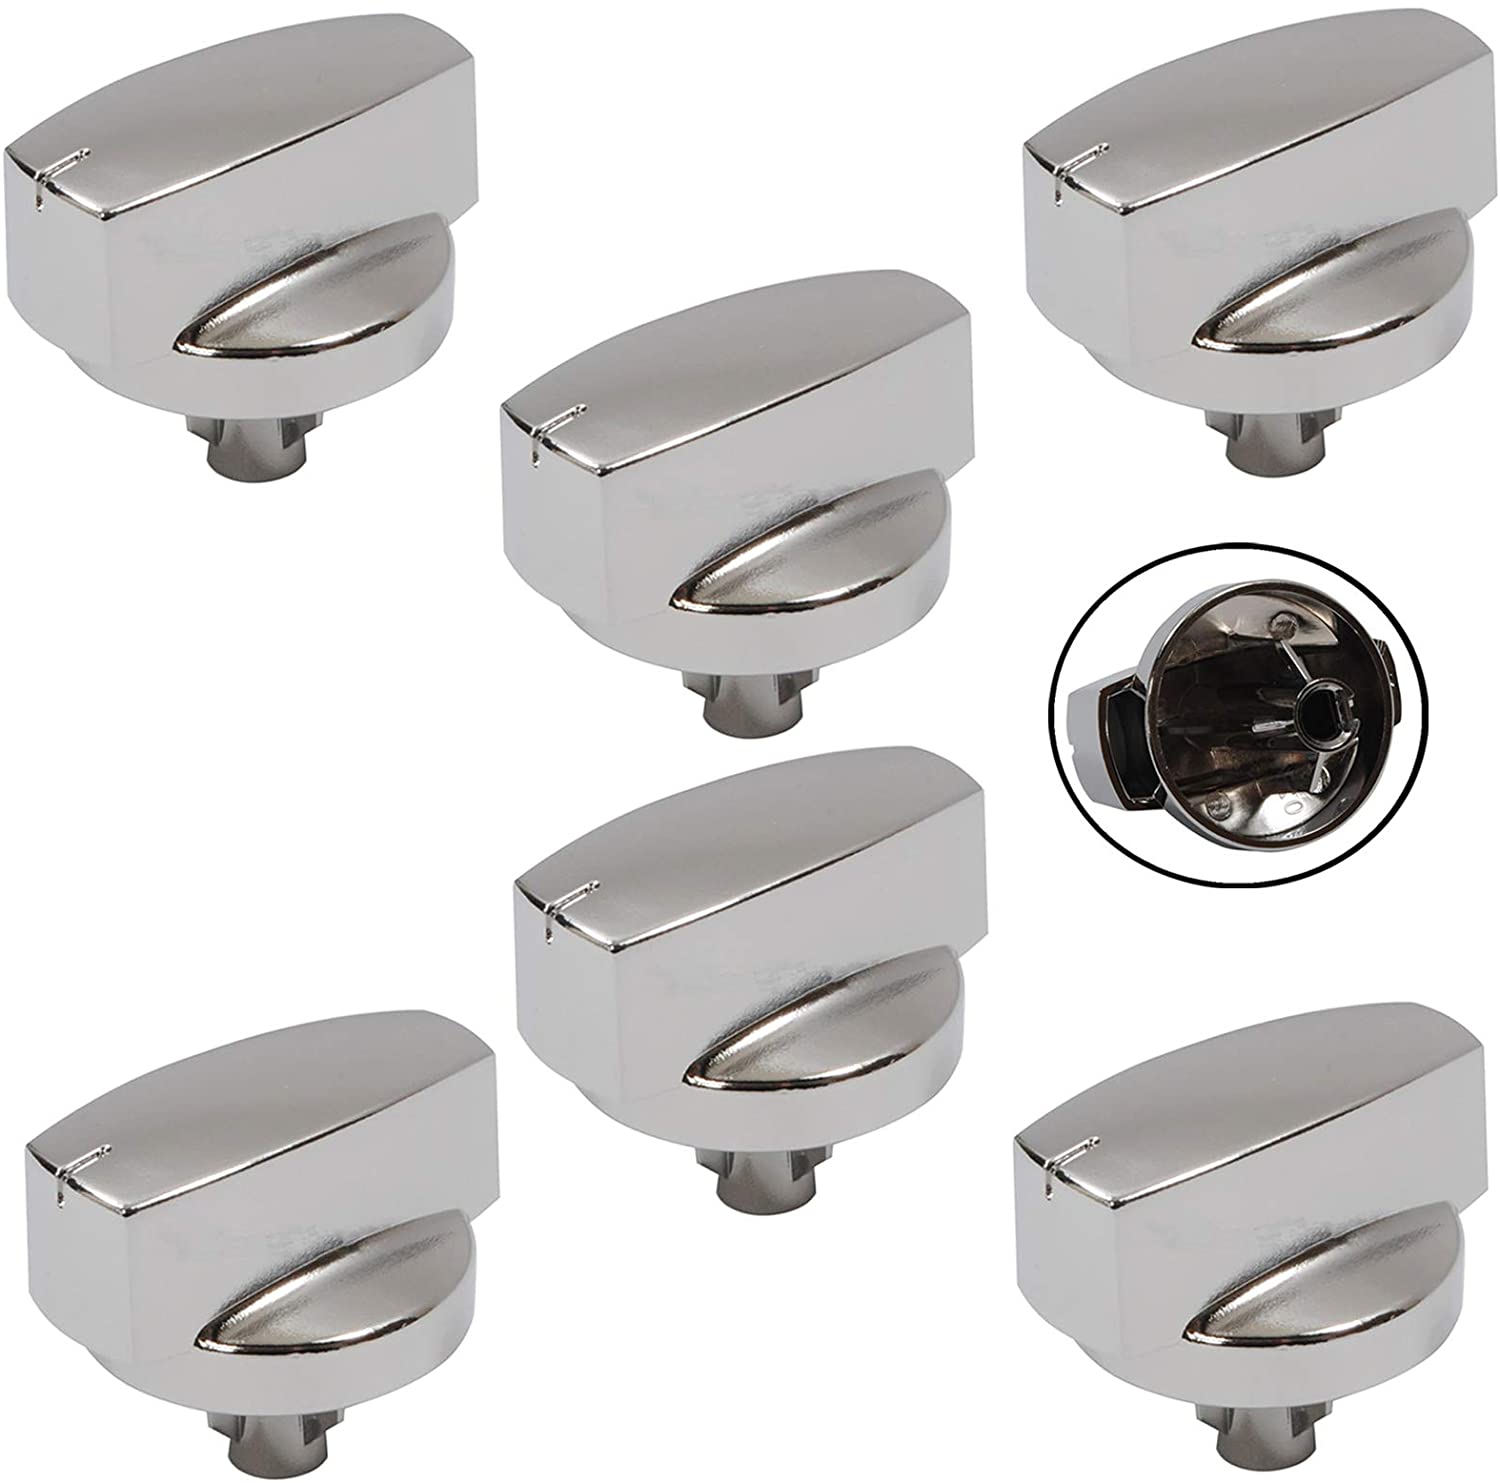 BELLING Oven Cooker Knob Function Control Switch 444445412 444445413 1000DF (Silver/Chrome) Pack of 6